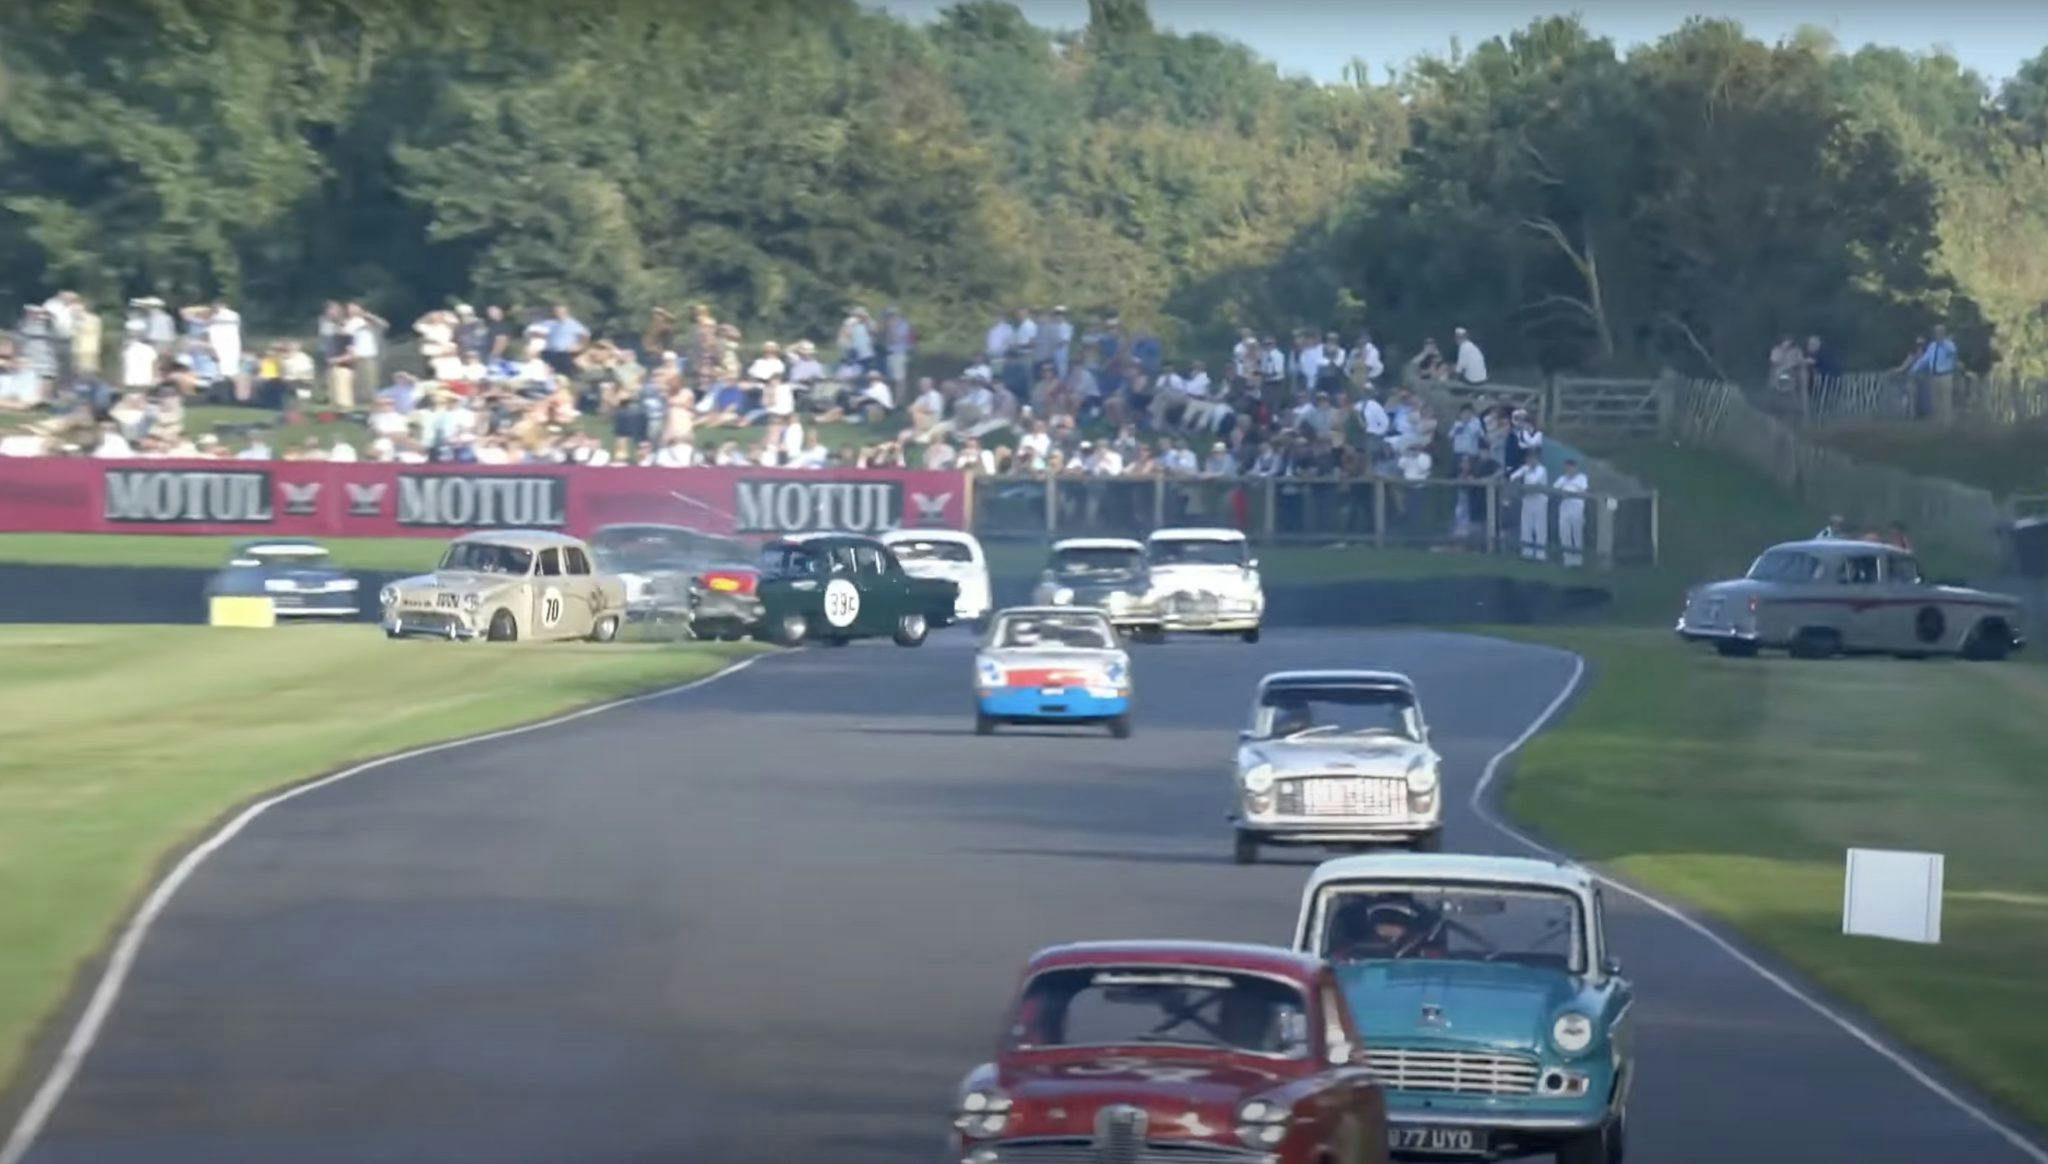 Goodwood Ford St Marys Trophy vintage racing action